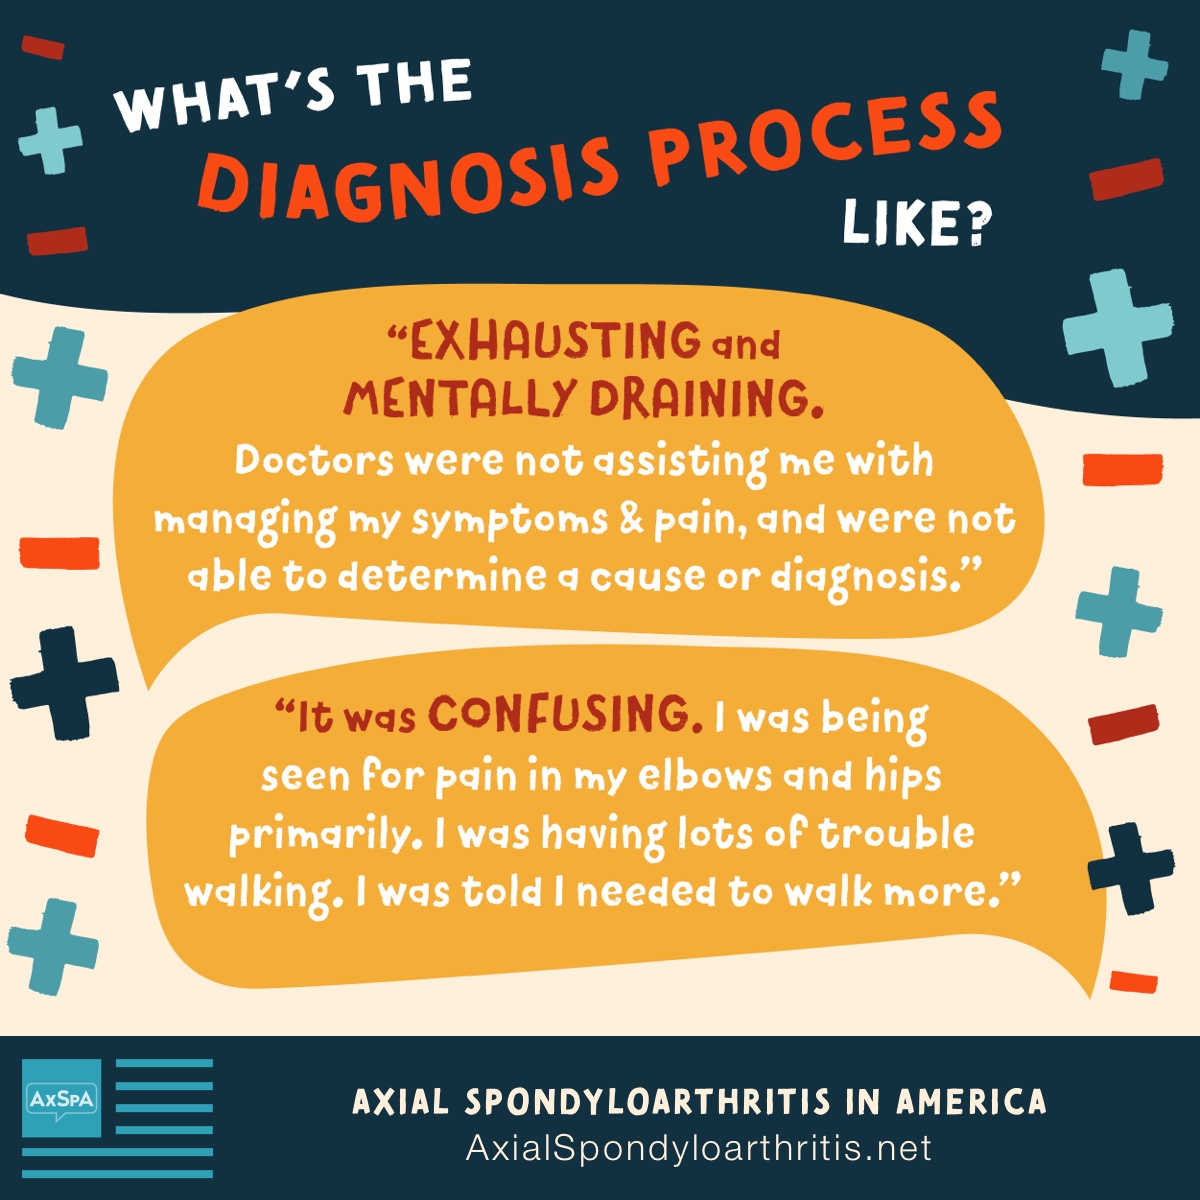 Quotes from those living with axial spondyloarthritis expressing that finding a diagnosis was, quote, exhausting, mentally draining, and confusing.